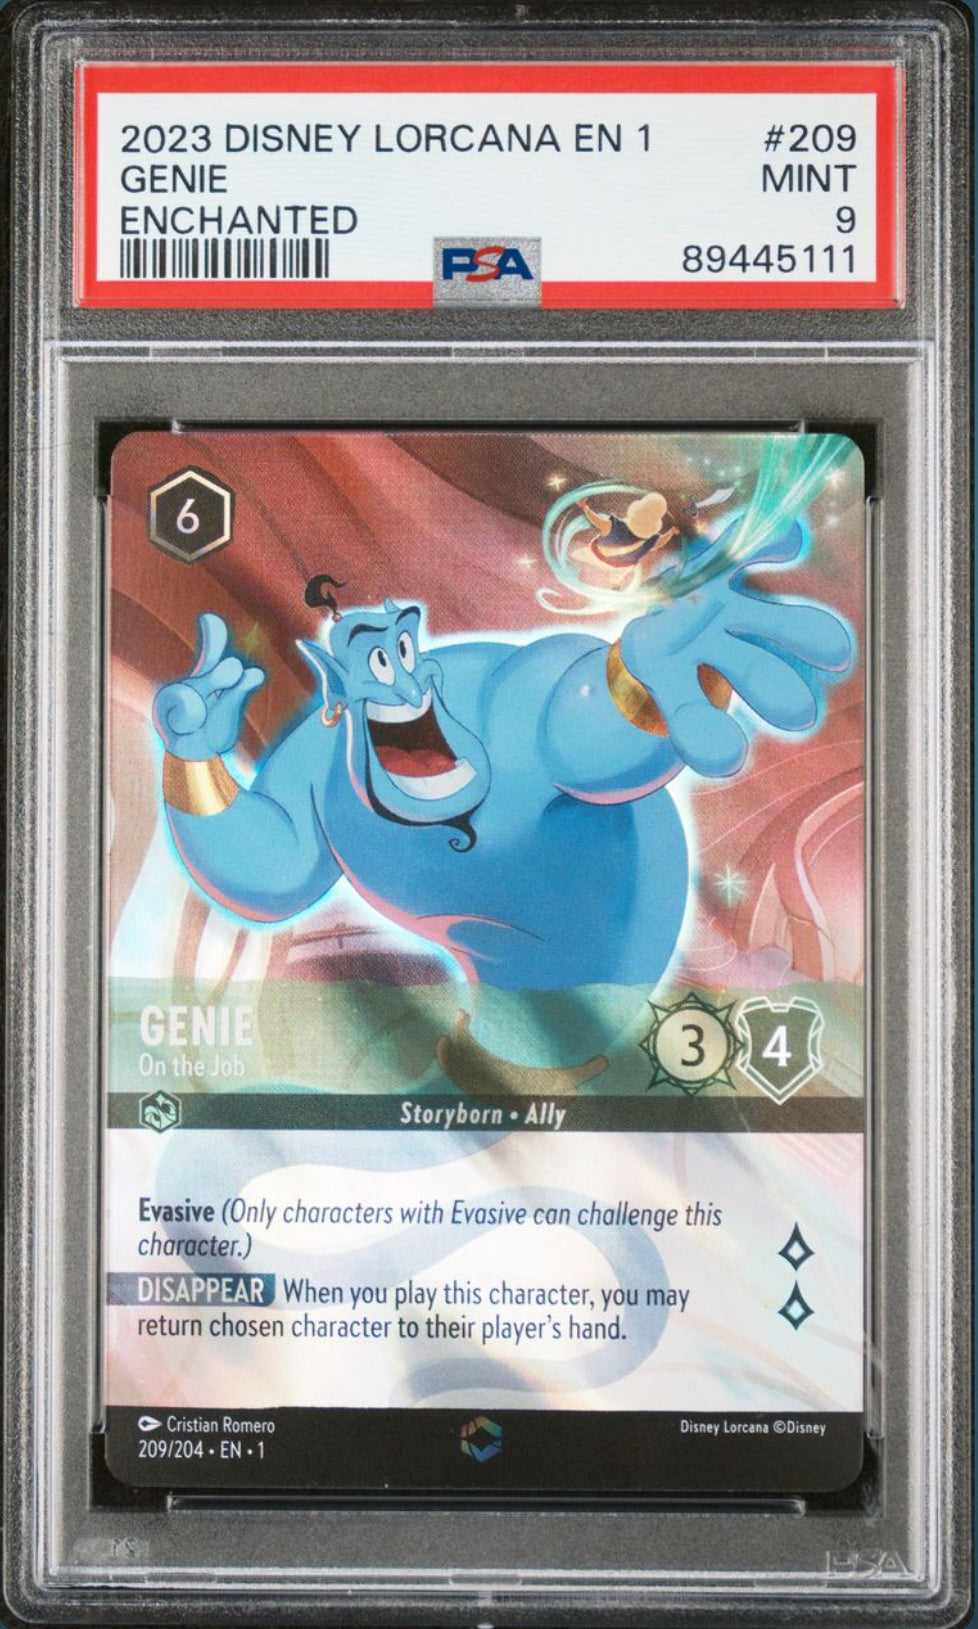 Genie - On the Job - [Foil, Enchanted, Graded PSA 9] The First Chapter (1)